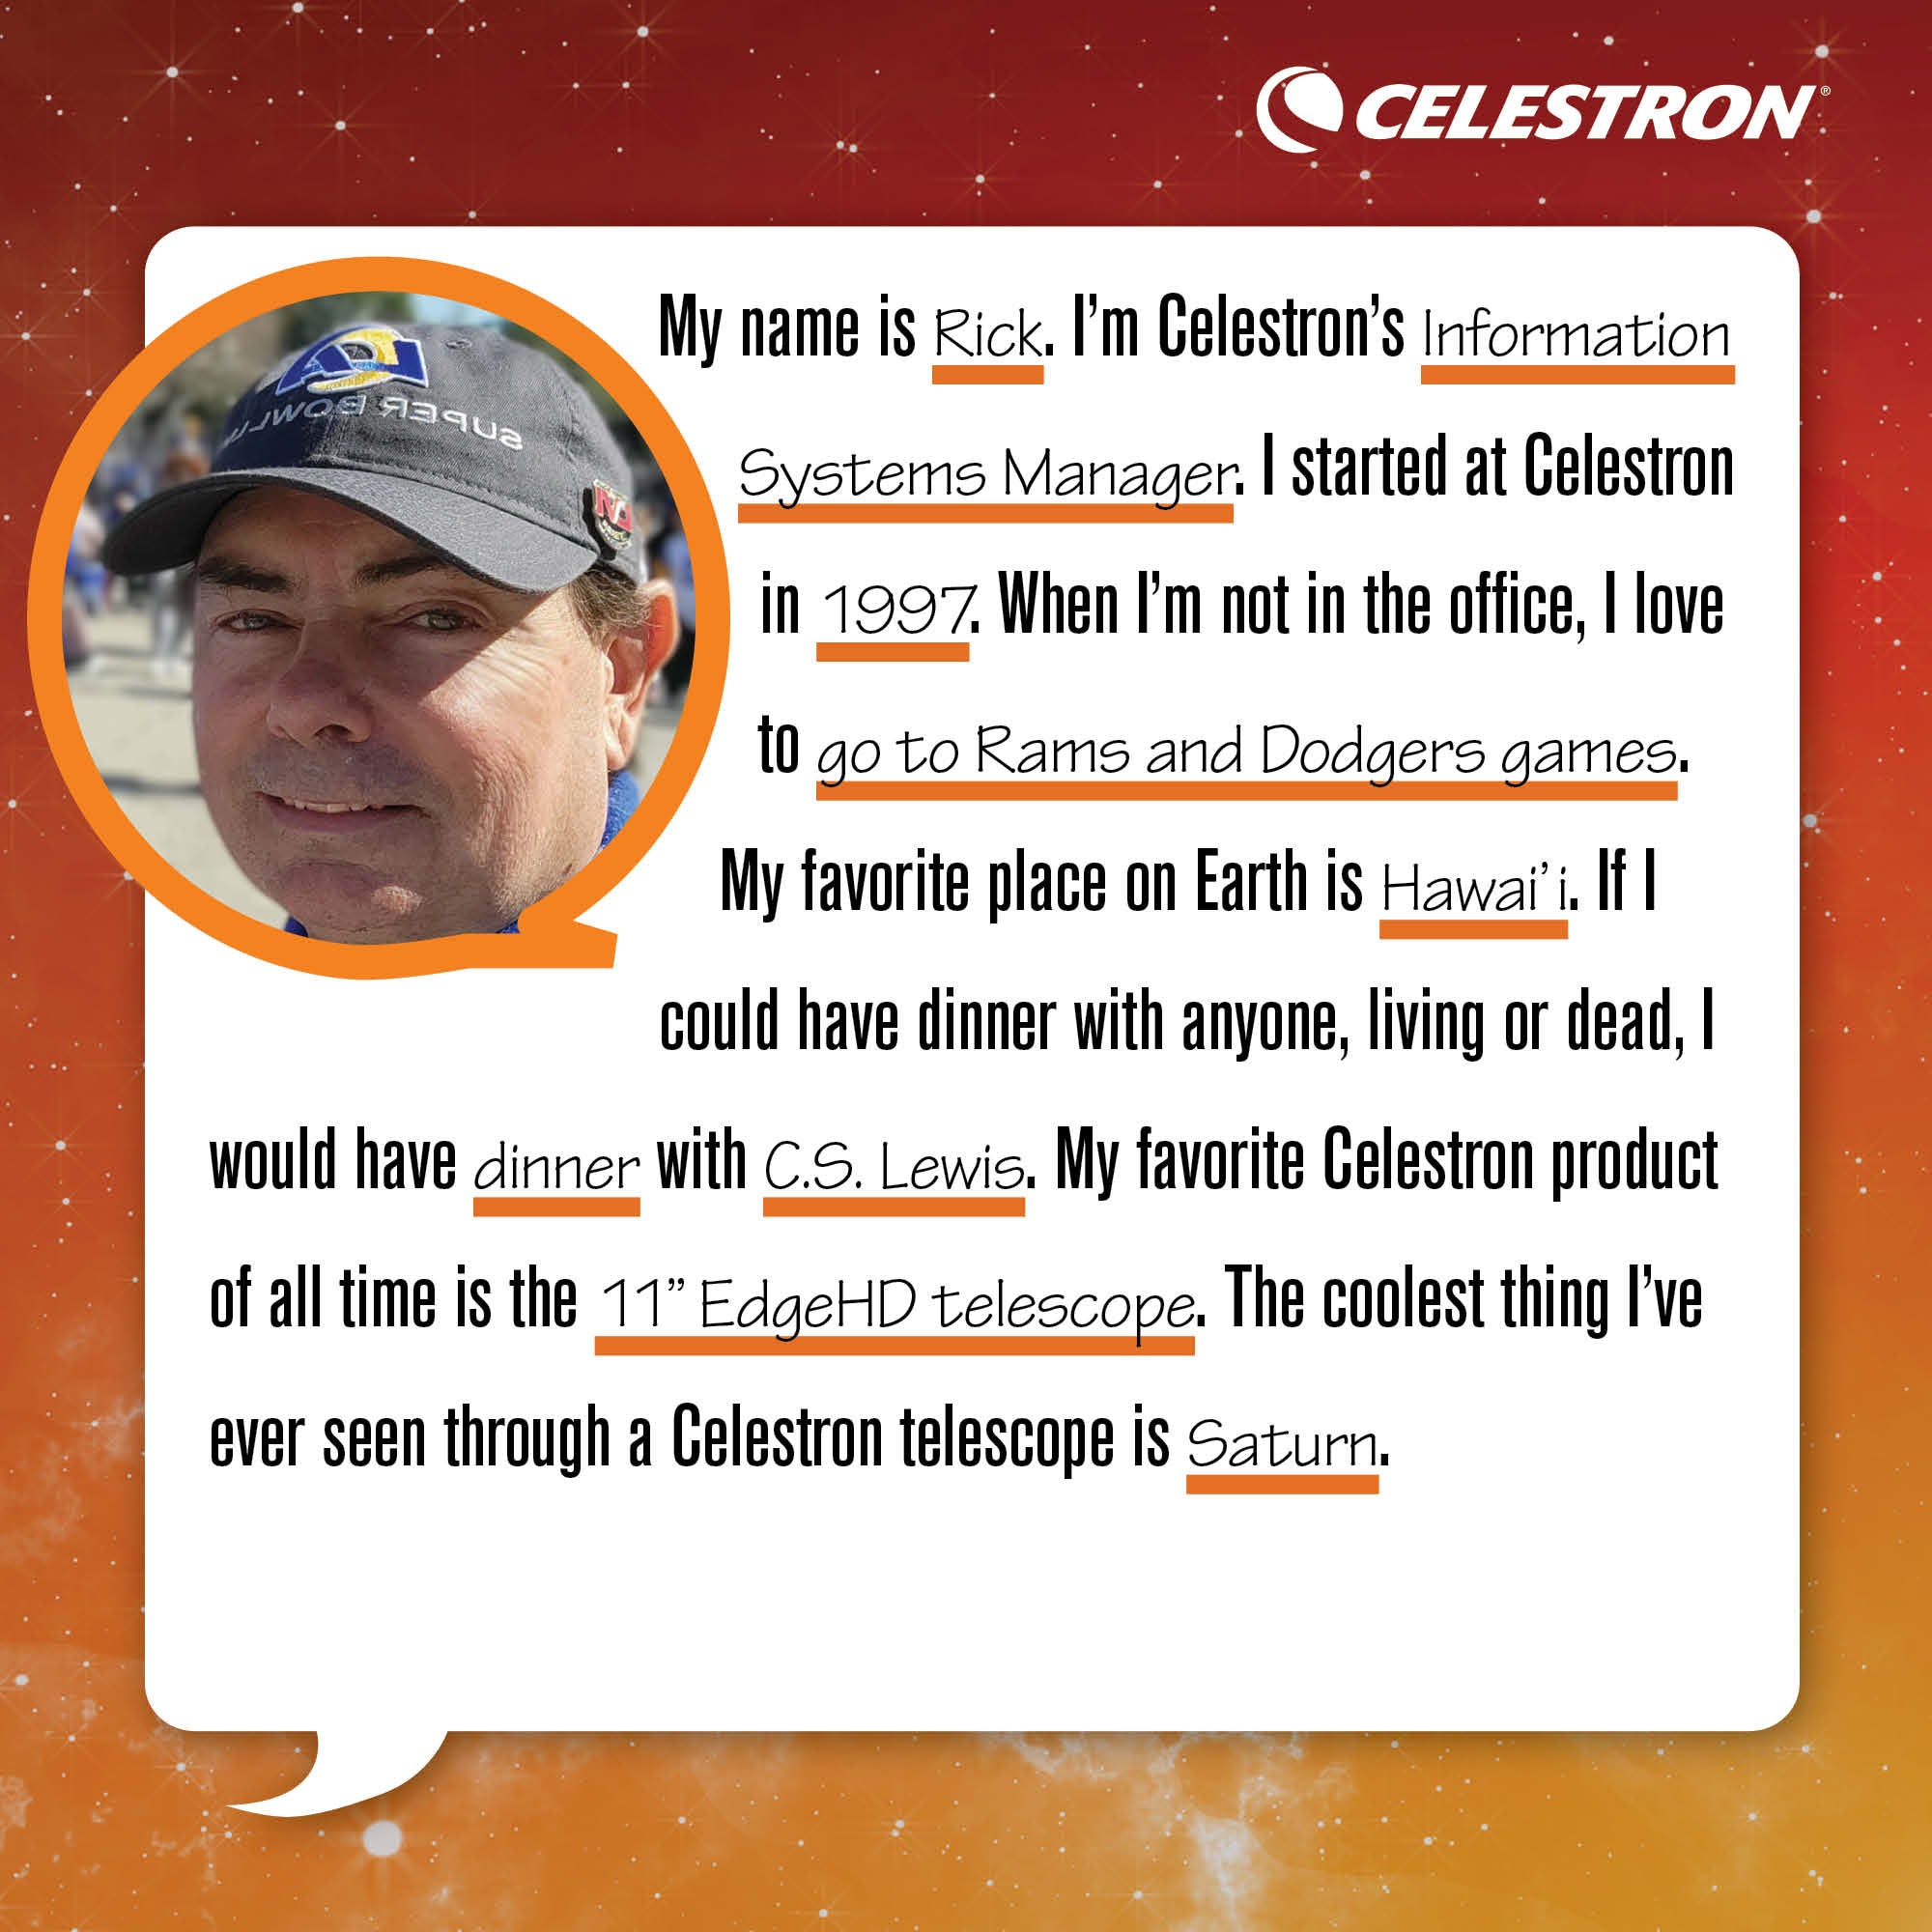 My name is Rick. I'm Celestron's Information Systems Manager. I started at Celestron in 1997. When I'm not in the office, I love to go to Rams and Dodgers games.  My favorite place on Earth is Hawai'i. If I could have dinner with anyone, living or dead, I would have dinner with C.S. Lewis. My favorite Celestron product of all time is the 11 EdgeHD telescope. The coolest thing I’ve ever seen through a Celestron telescope is Saturn.